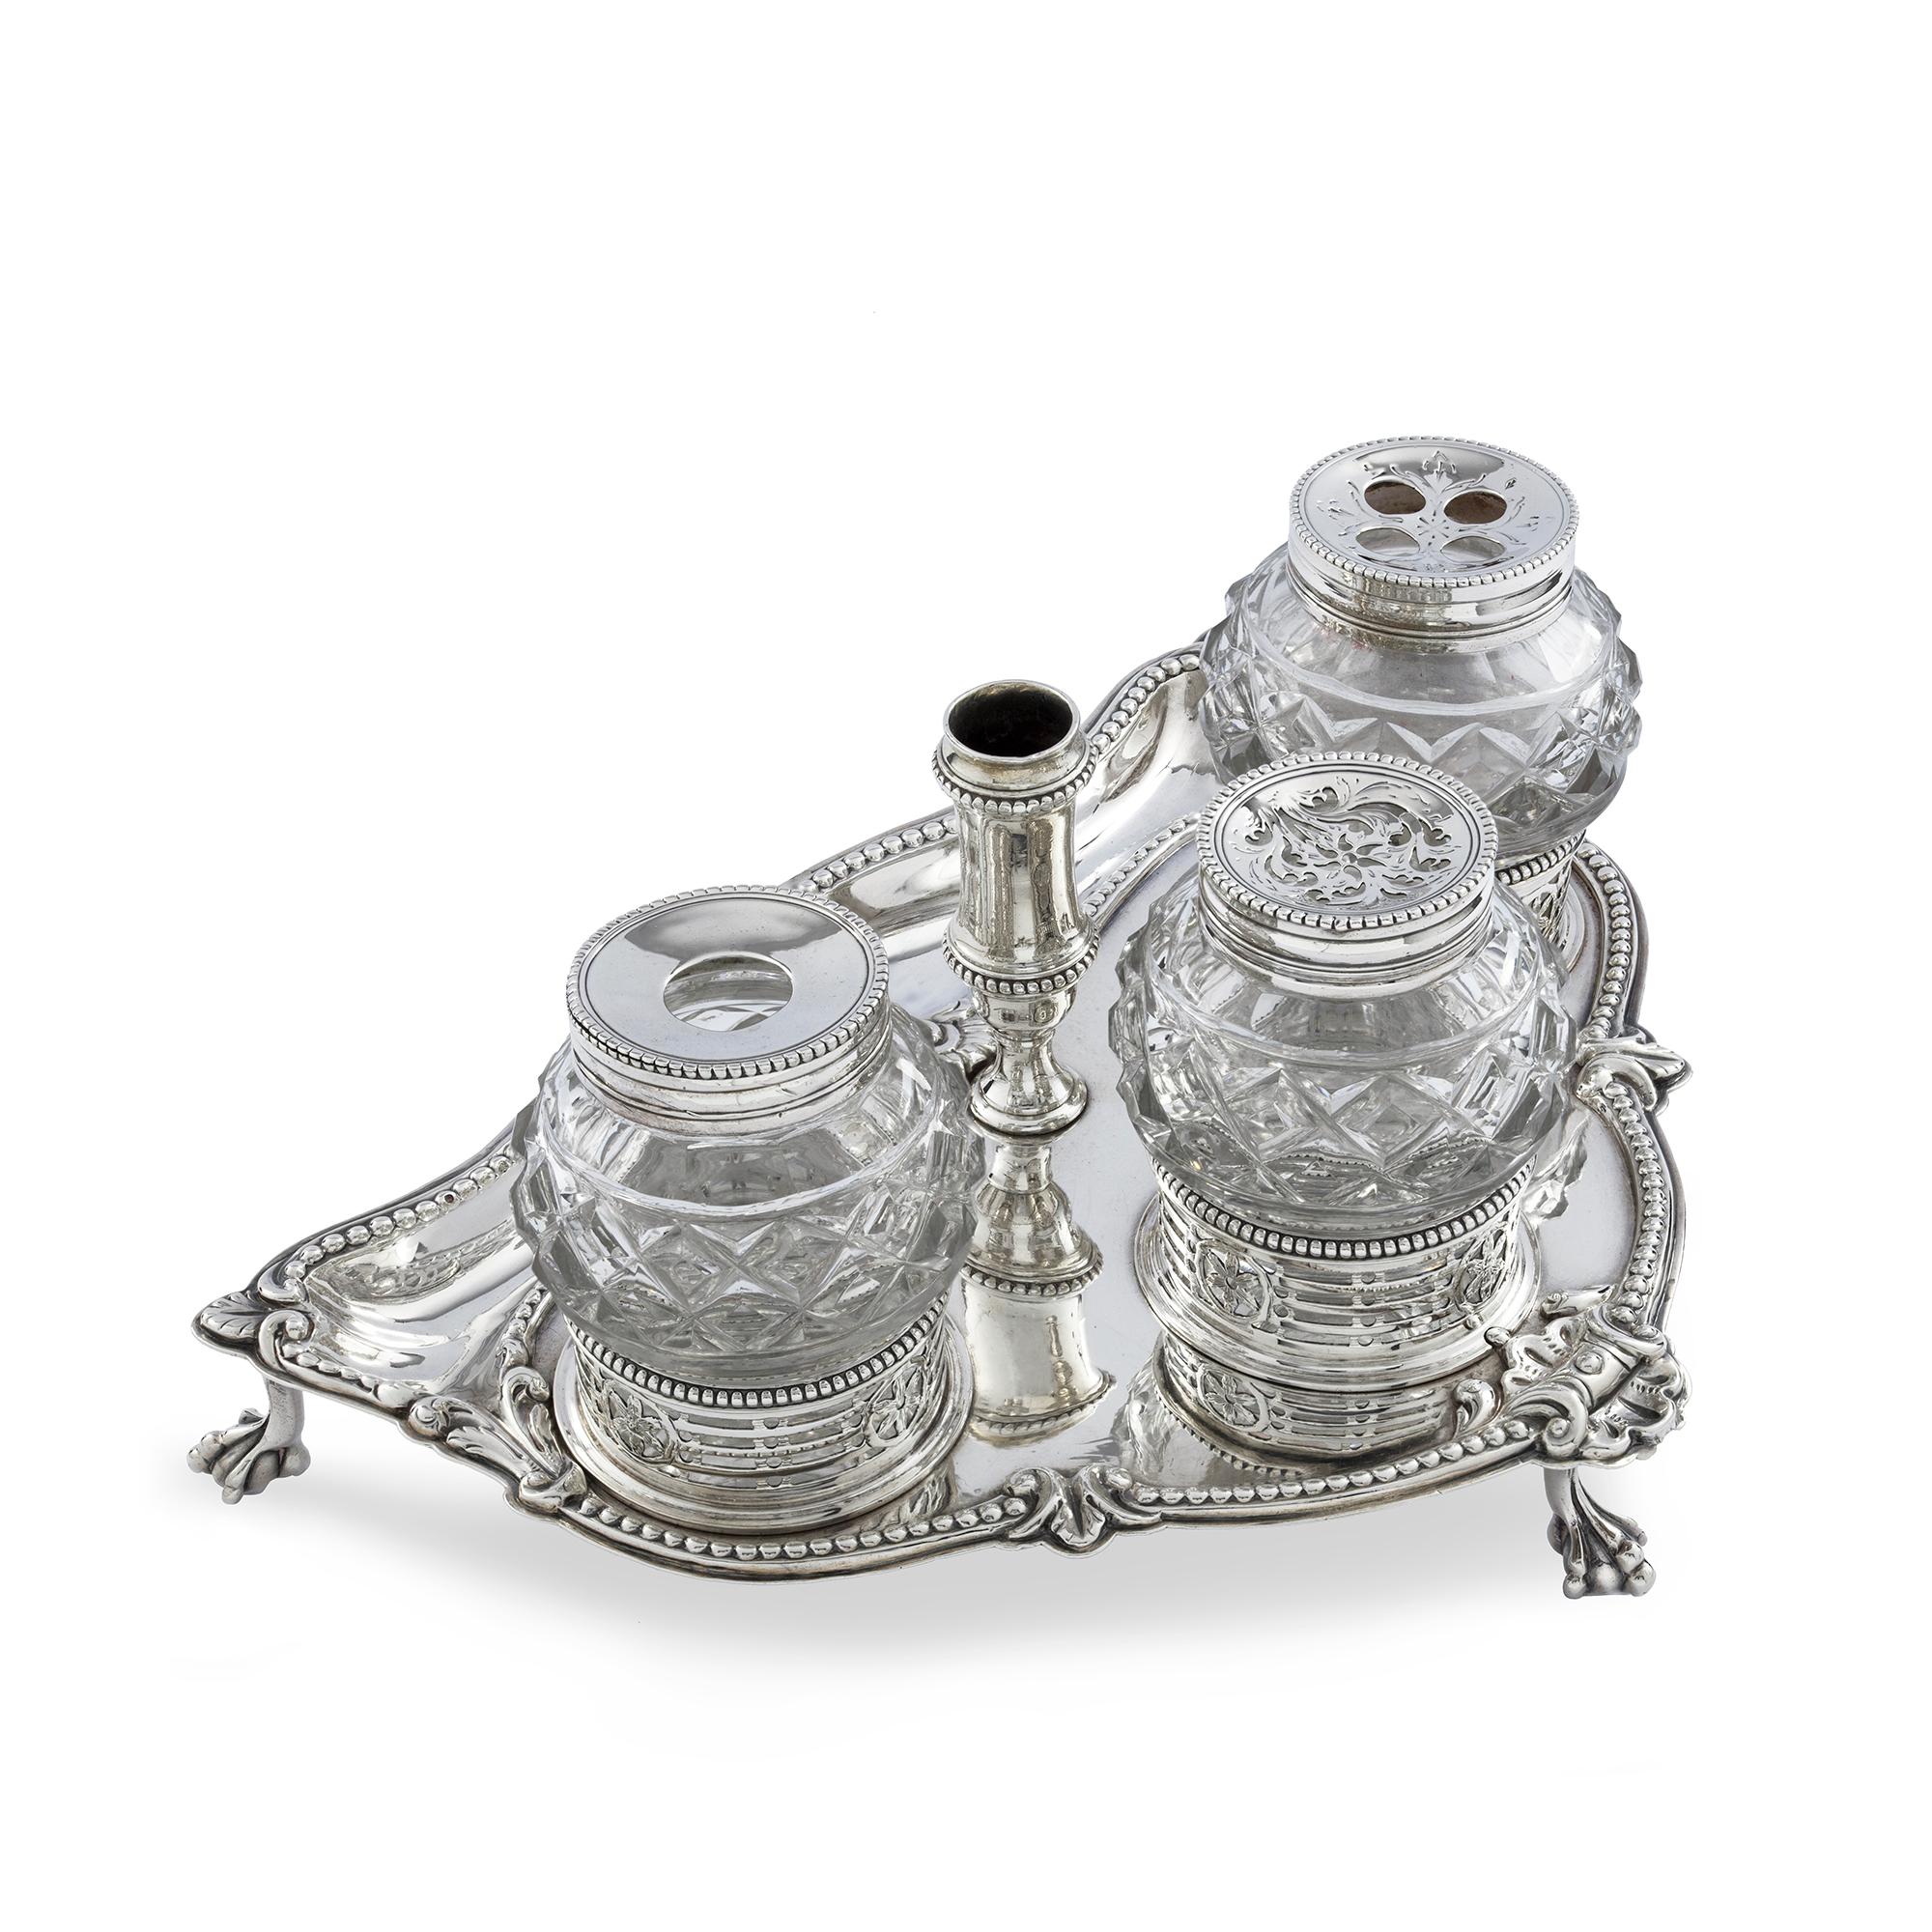 An Antique silver ink stand, comprising of three cut glass pots, silver removable lids, with beaded and moulded rim, placed within circular pierced borders with floral motifs, balustrade shaped pen holder, silver shield  tray with beaded rim and